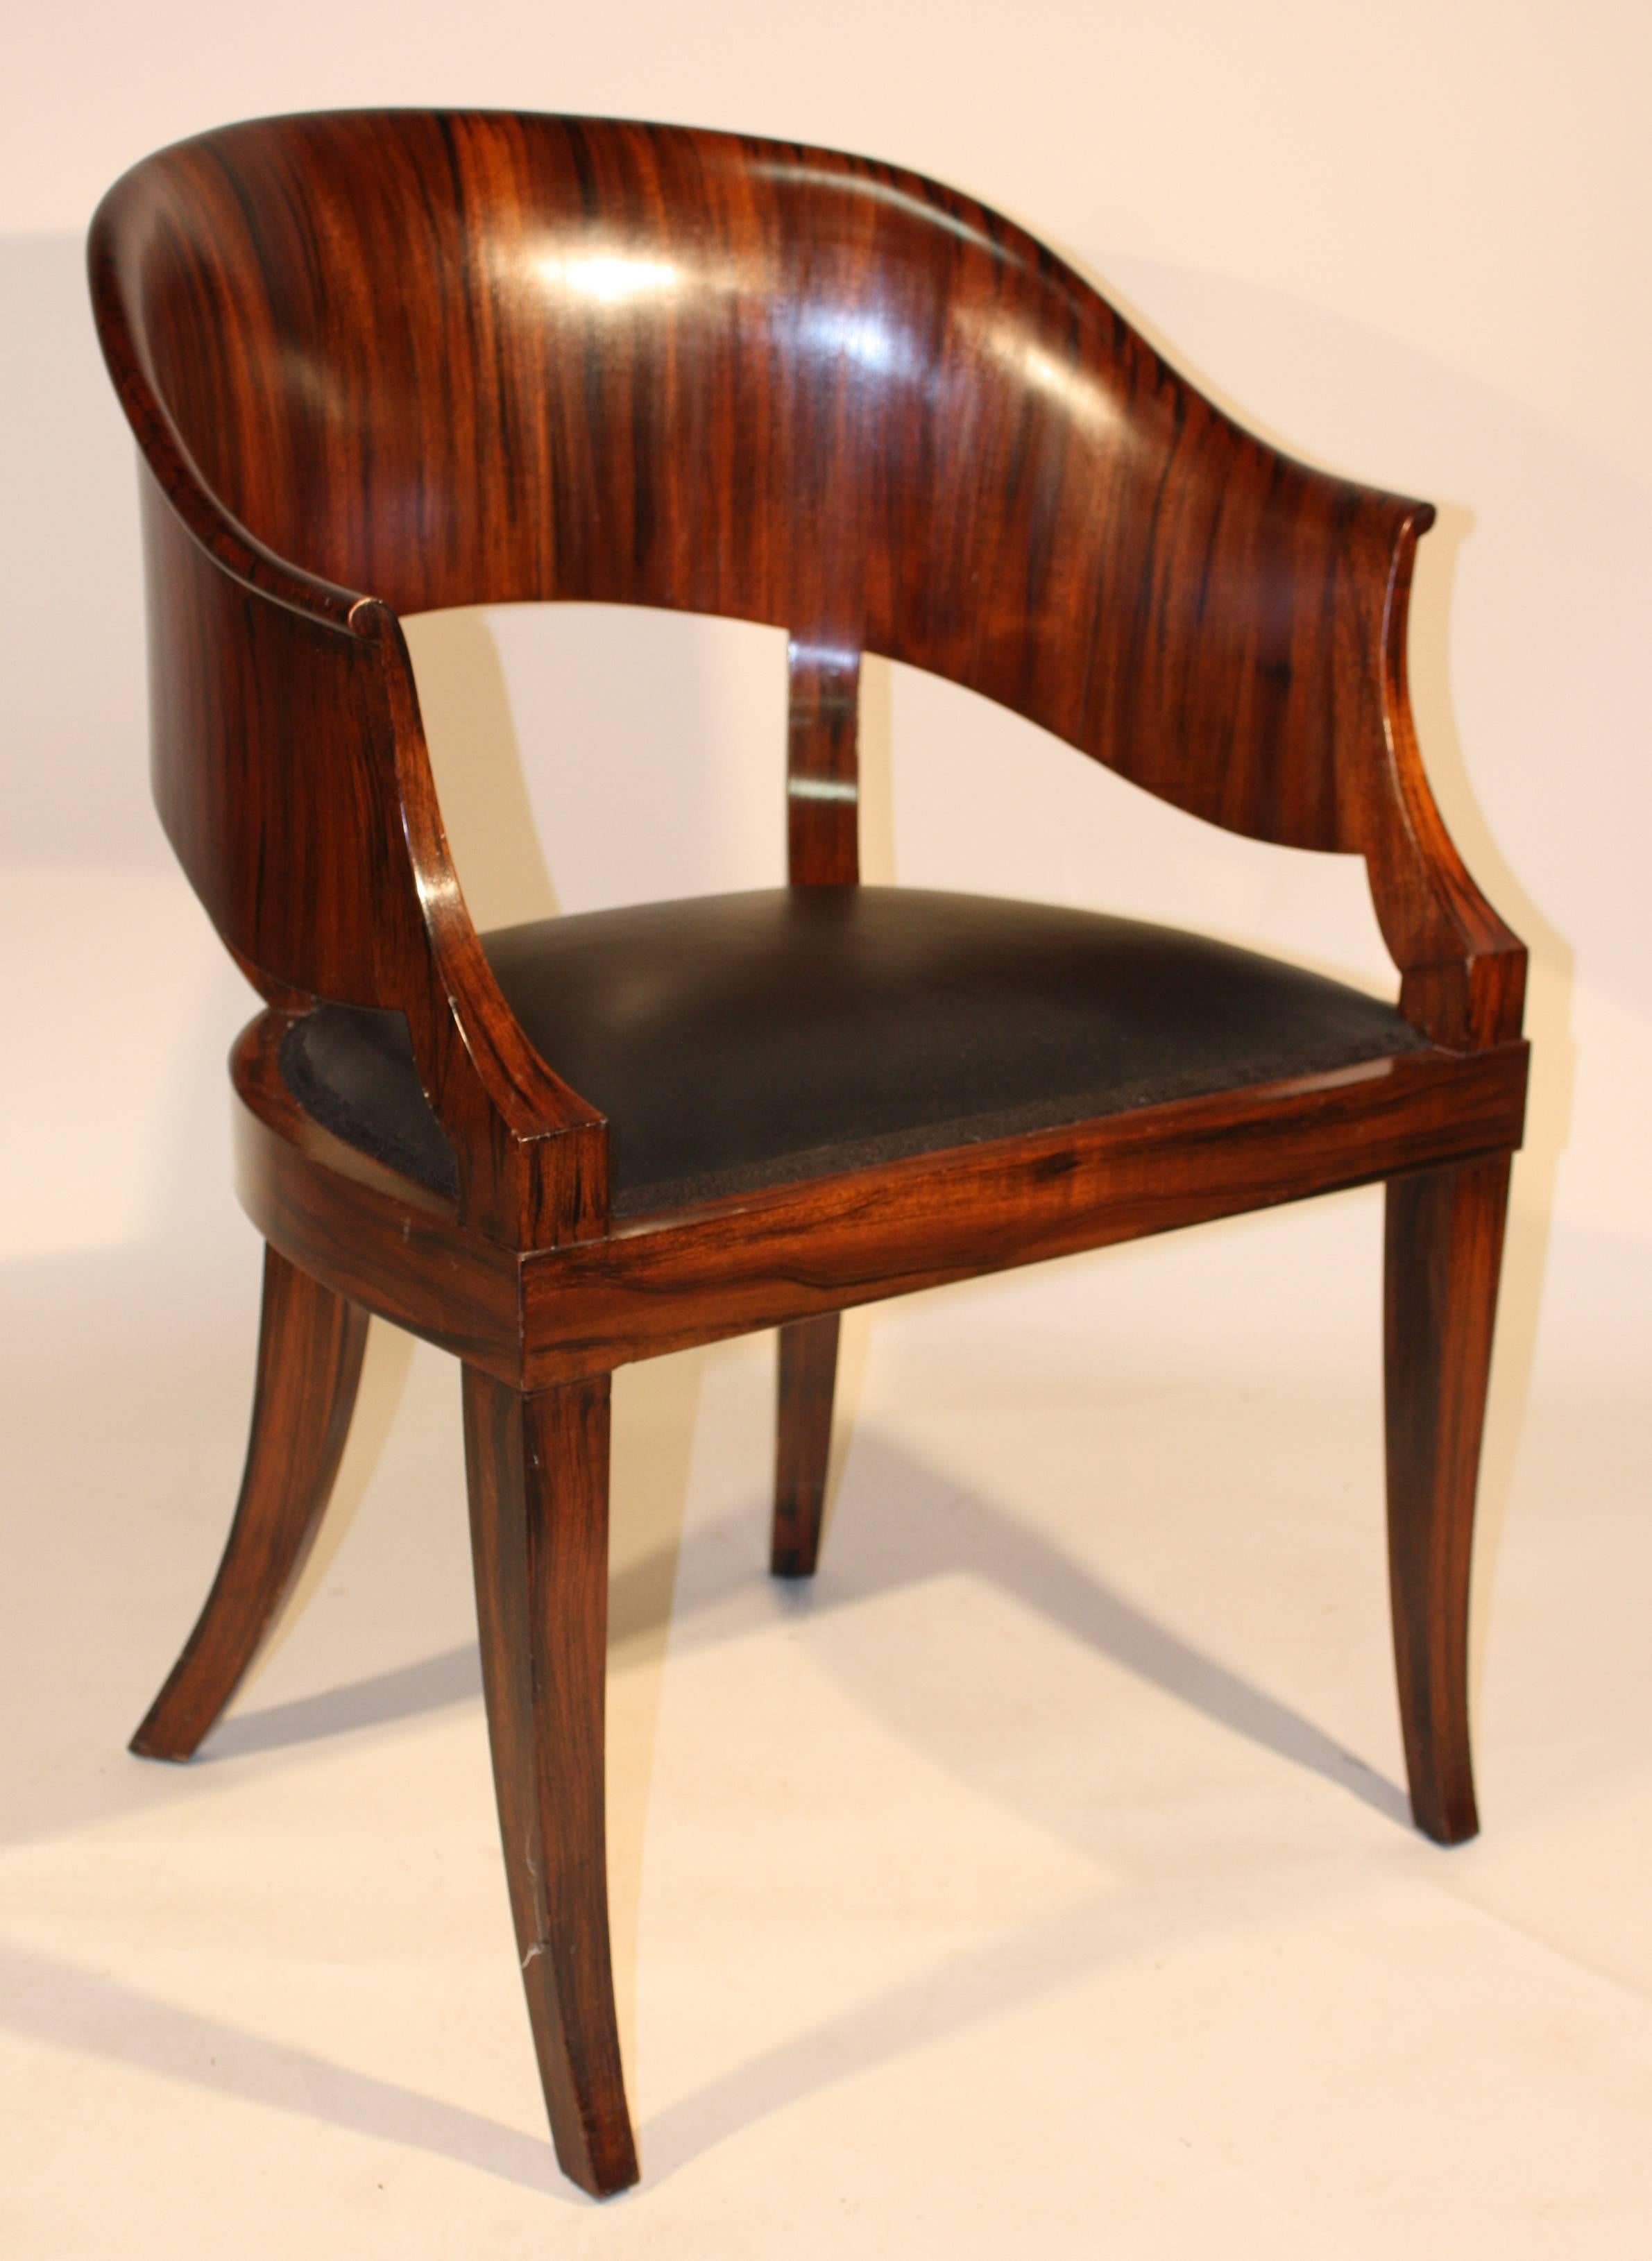 A French Art Deco yoke-back desk chair in mahogany, grain painted 